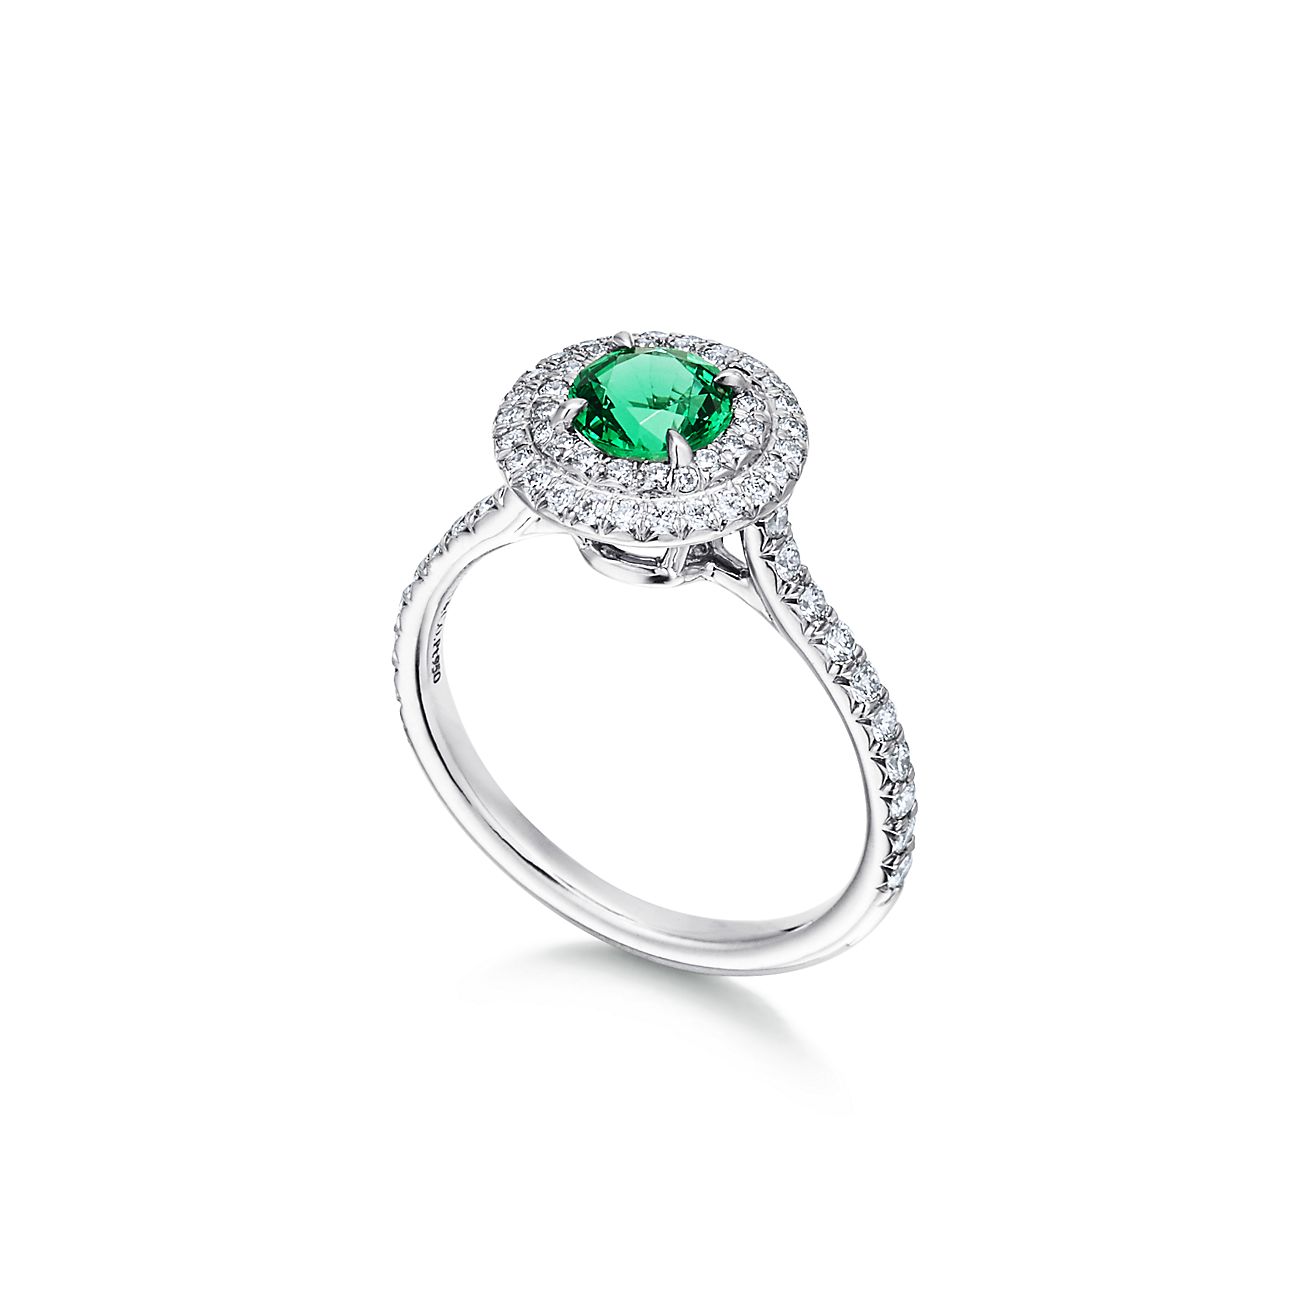 Tiffany Soleste ring in platinum with 